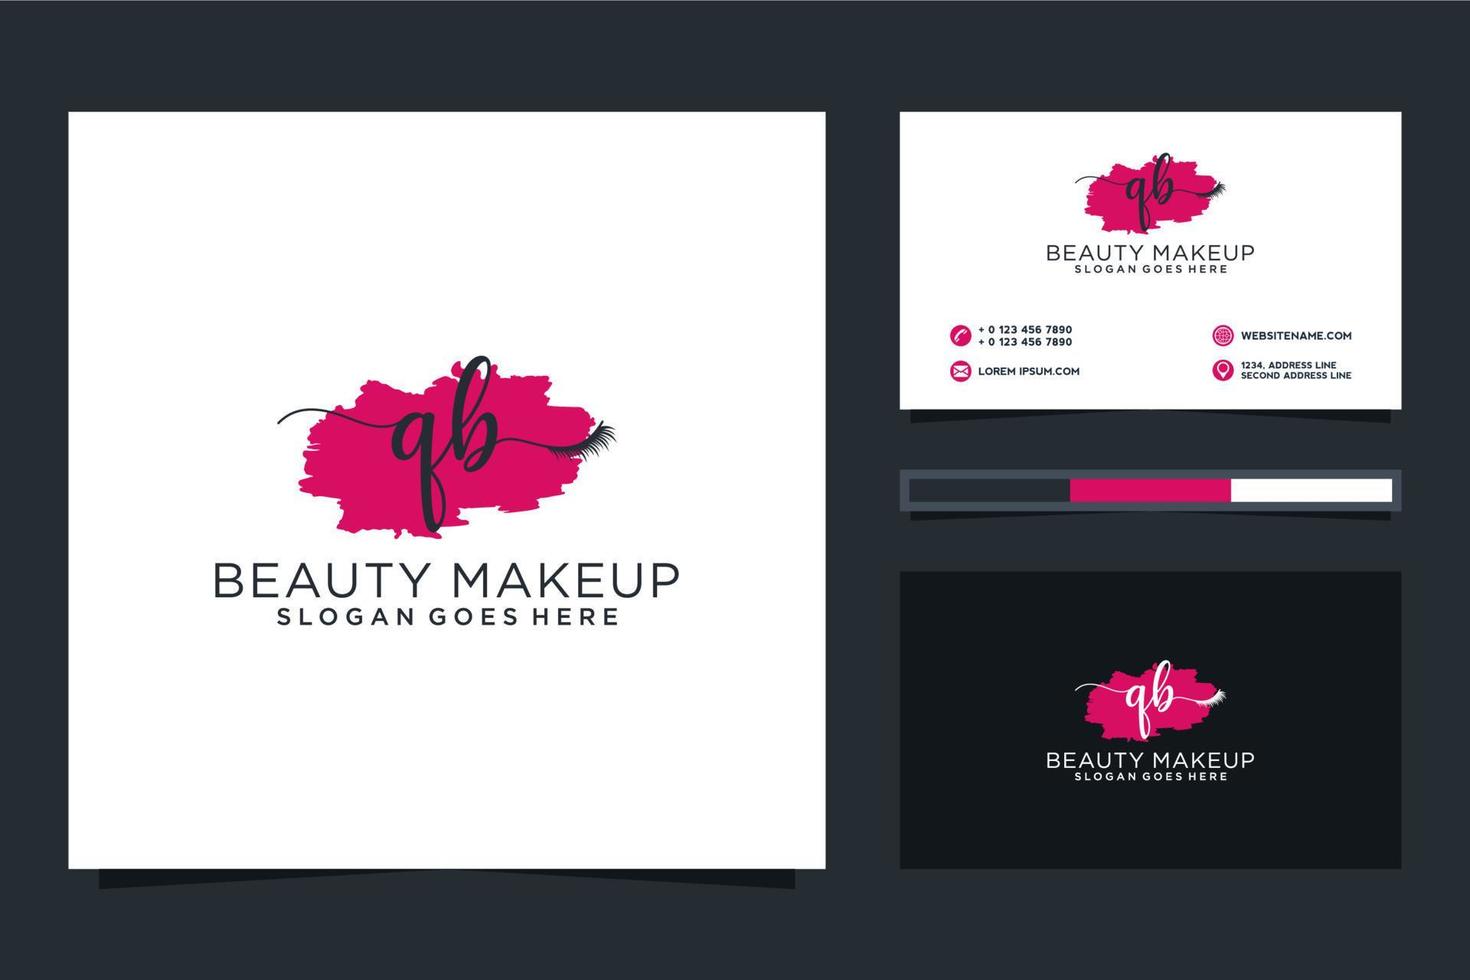 Initial QB Feminine logo collections and business card template Premium Vector